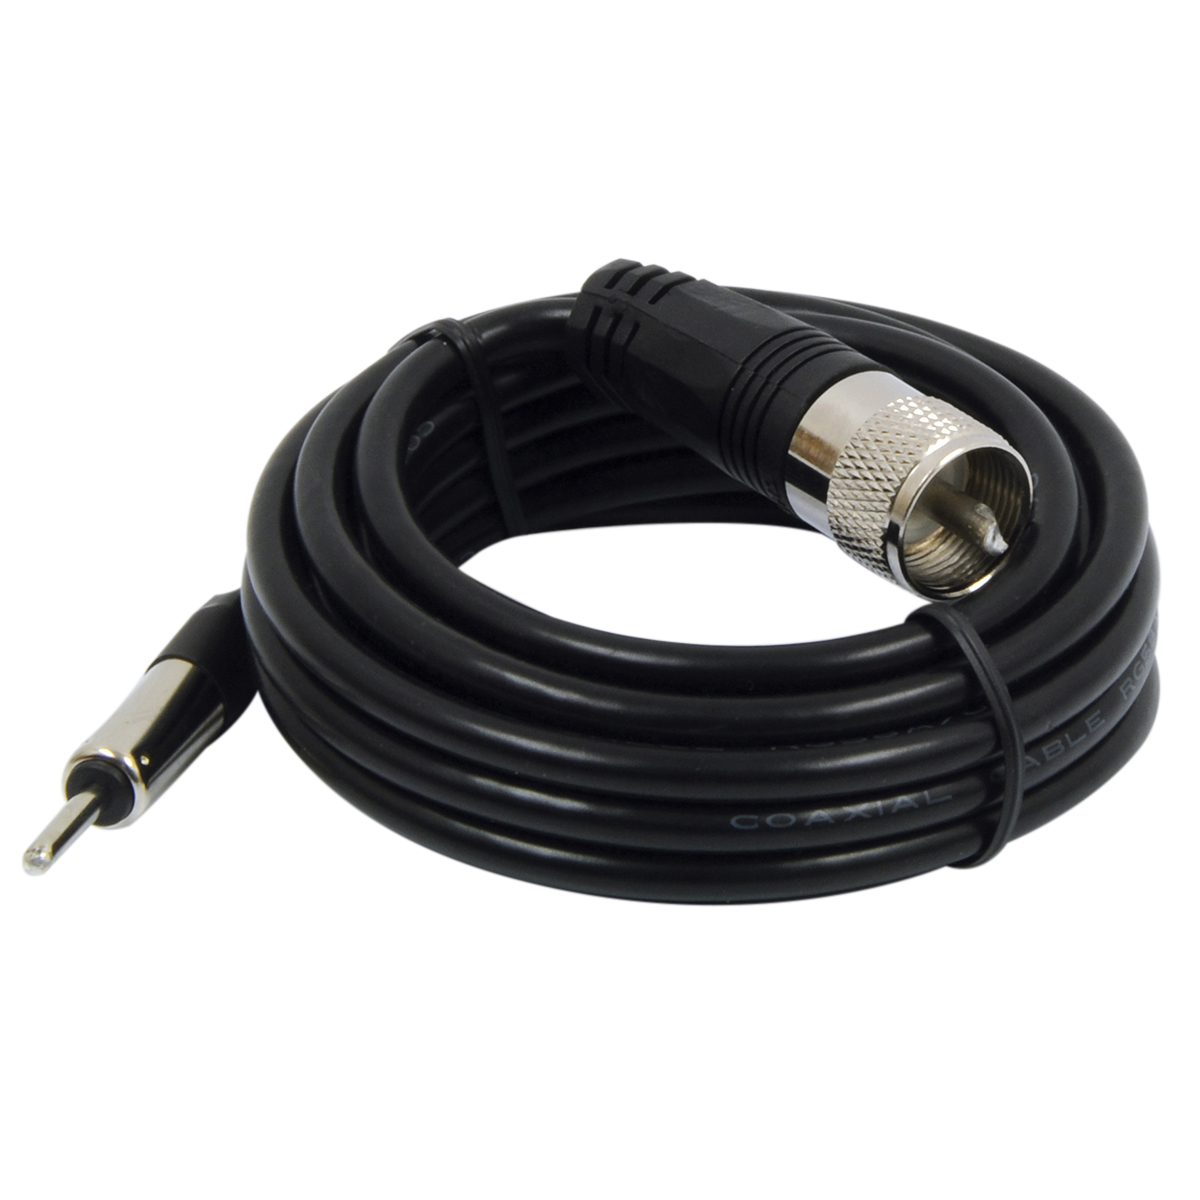 10' Pl-259 To Motorola Replacment Cable